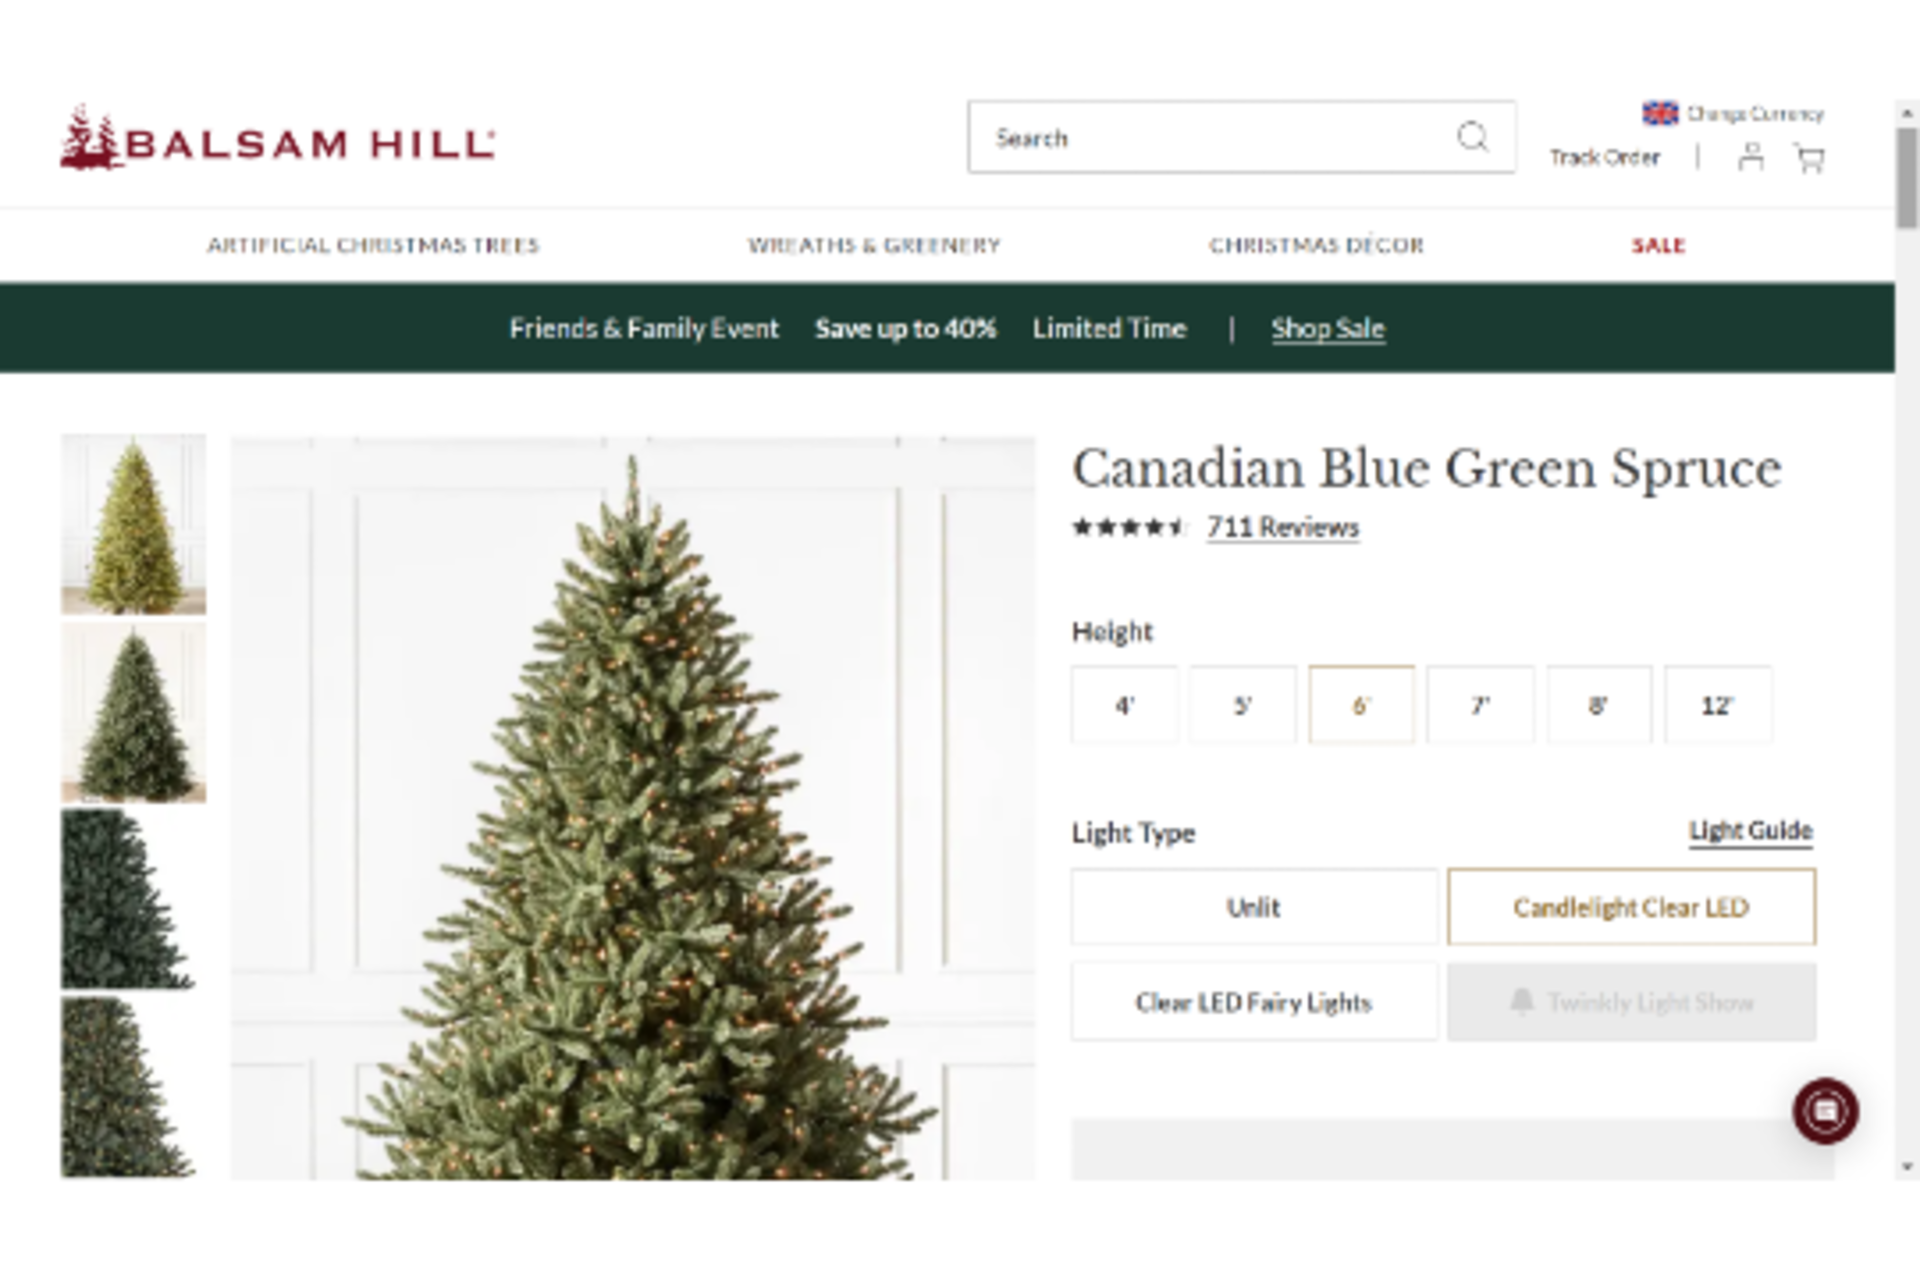 BH (The worlds leading Christmas Tree Brand) Canadian Blue Green Spruce 6' Tree - Image 2 of 2